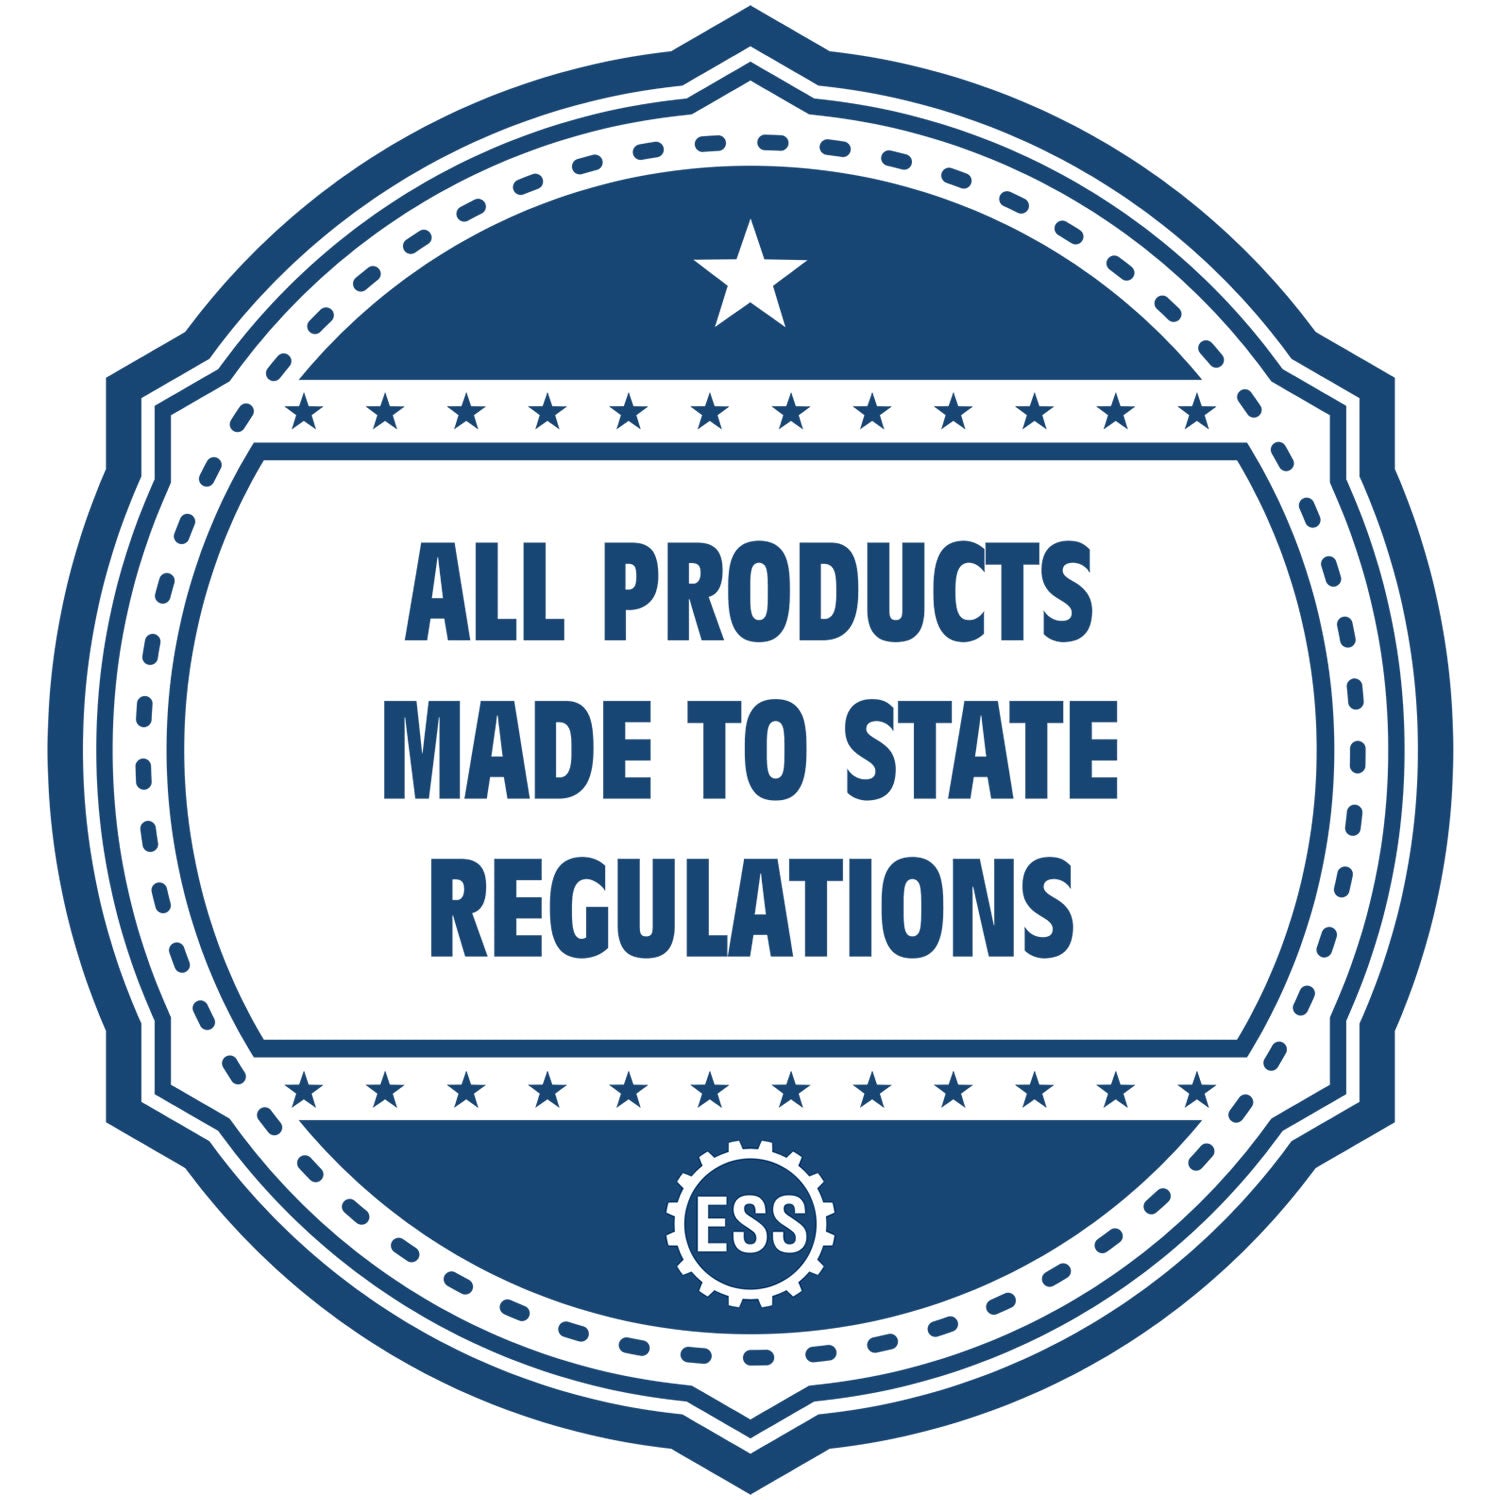 An icon or badge element for the Digital Oregon PE Stamp and Electronic Seal for Oregon Engineer showing that this product is made in compliance with state regulations.